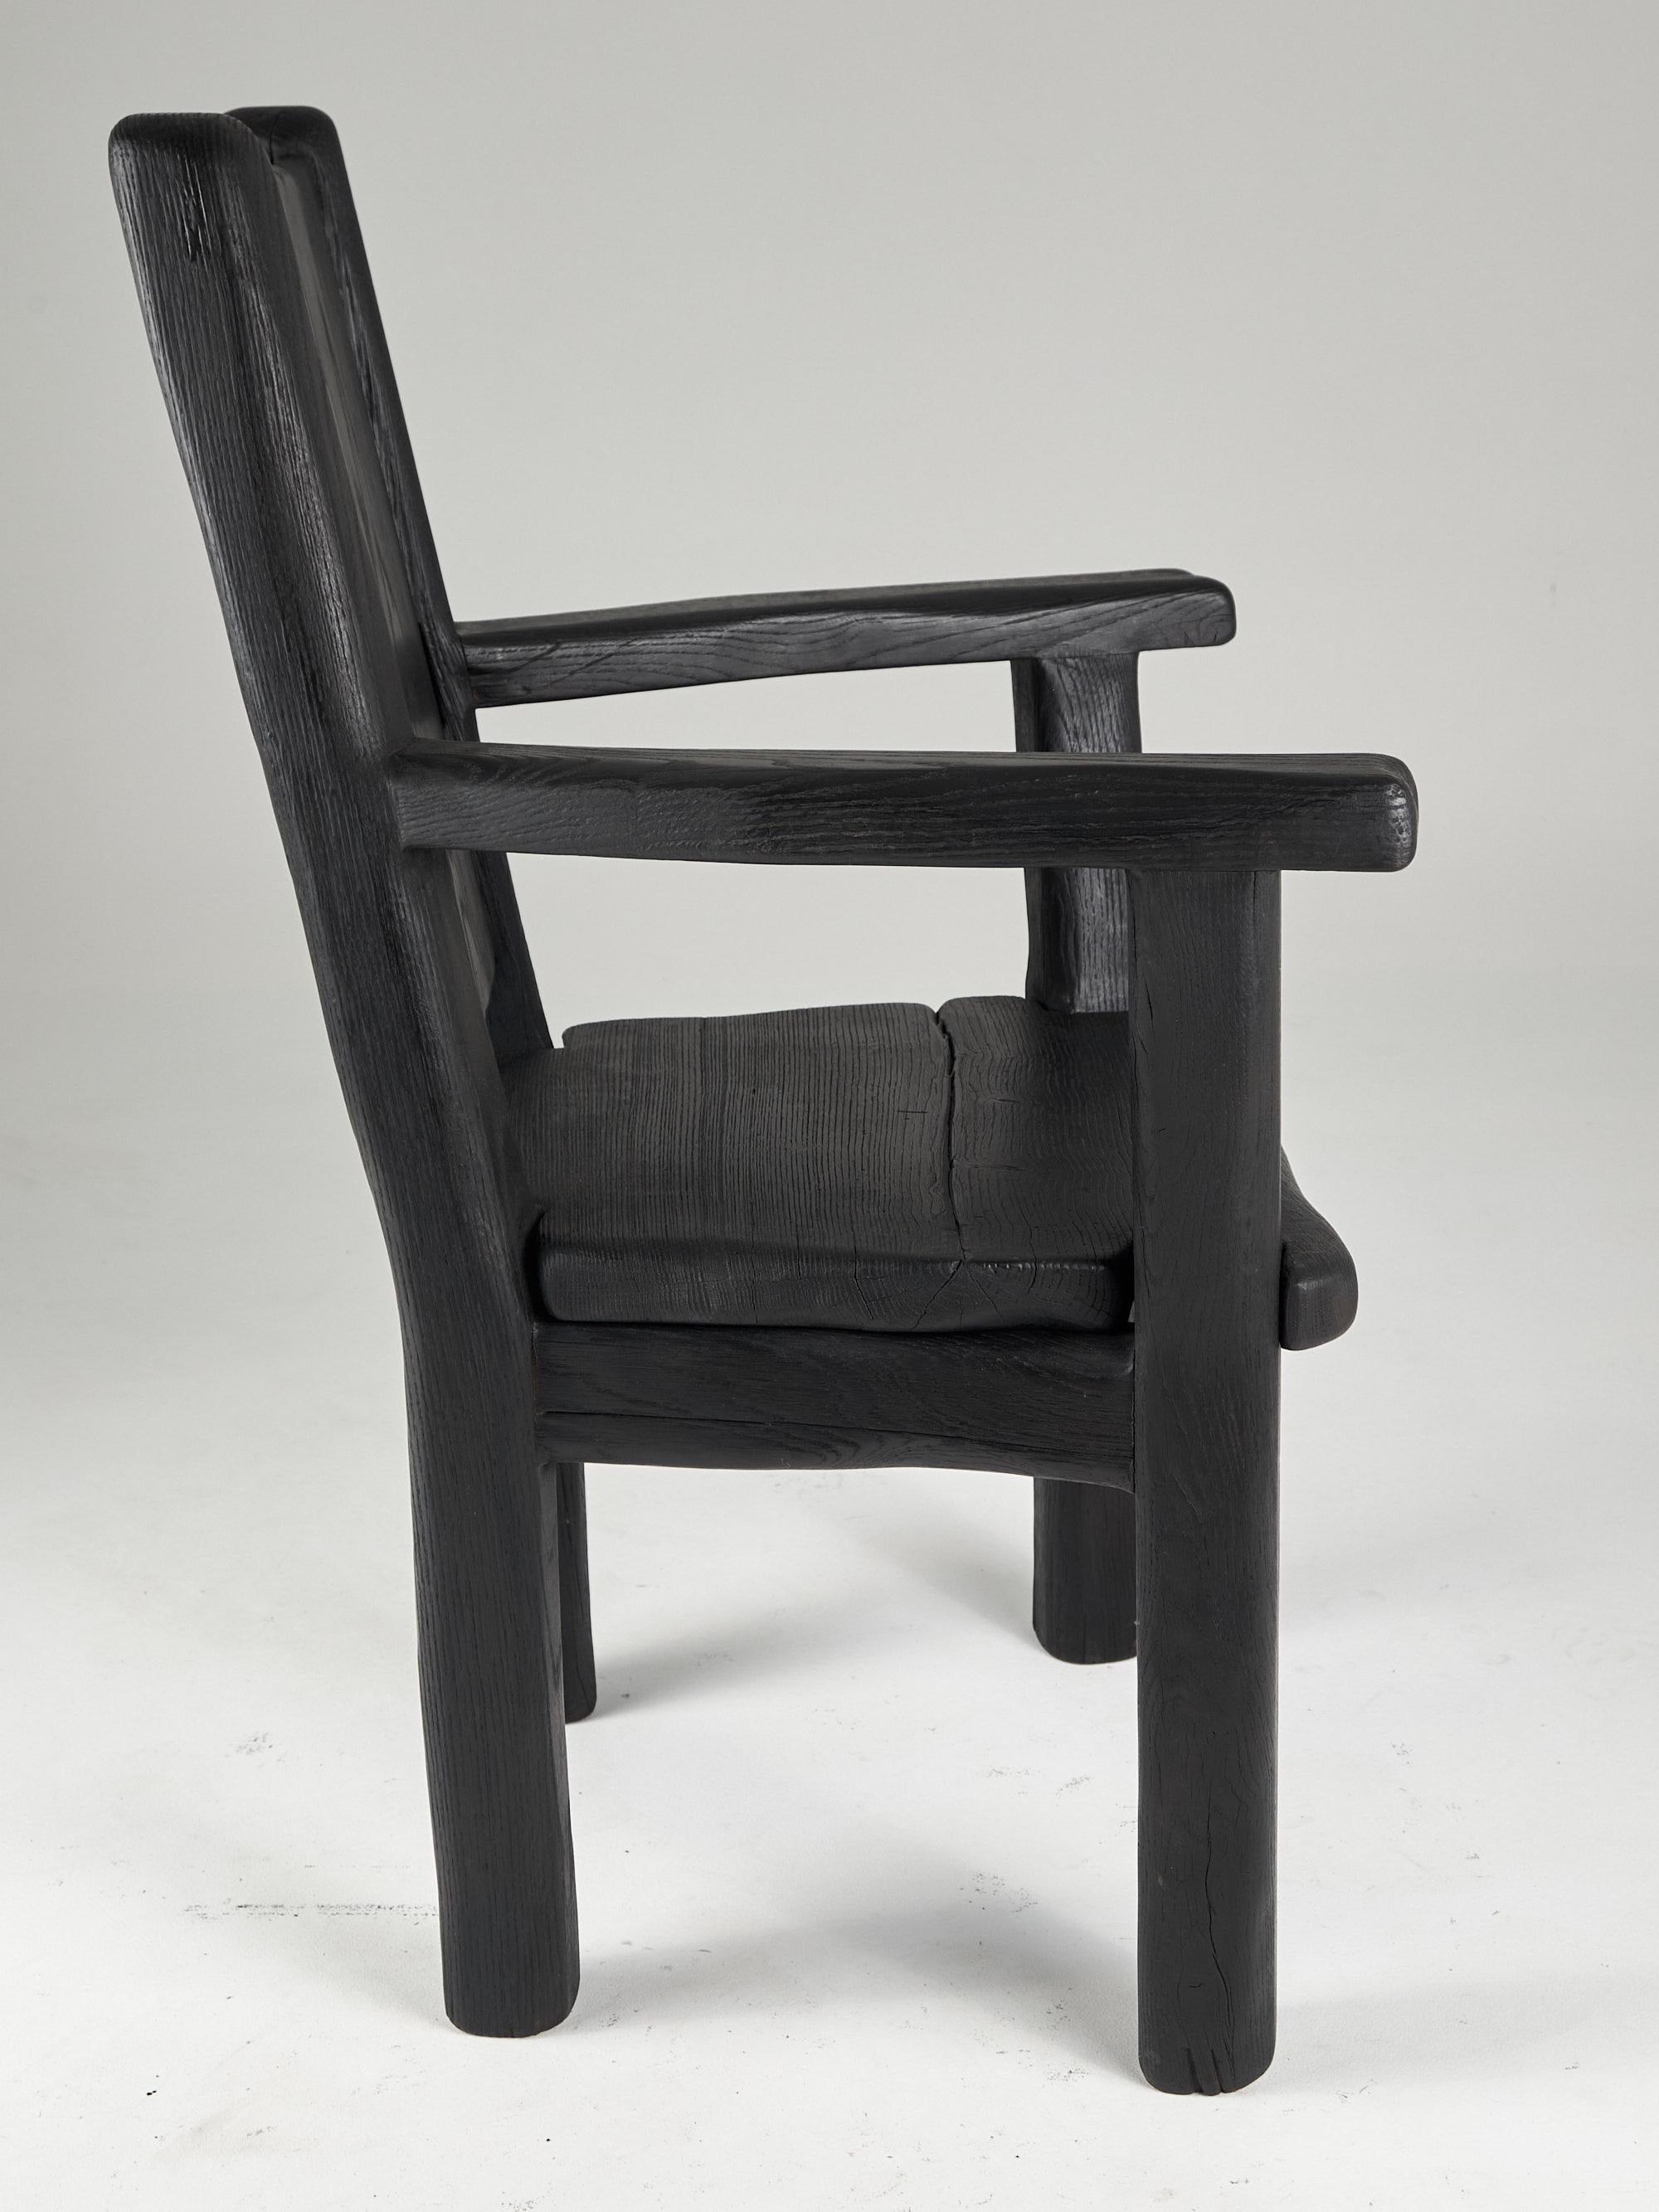 Massive Oak Armchair, Rustic, Burnt Black, For Generations to Last For Sale 4